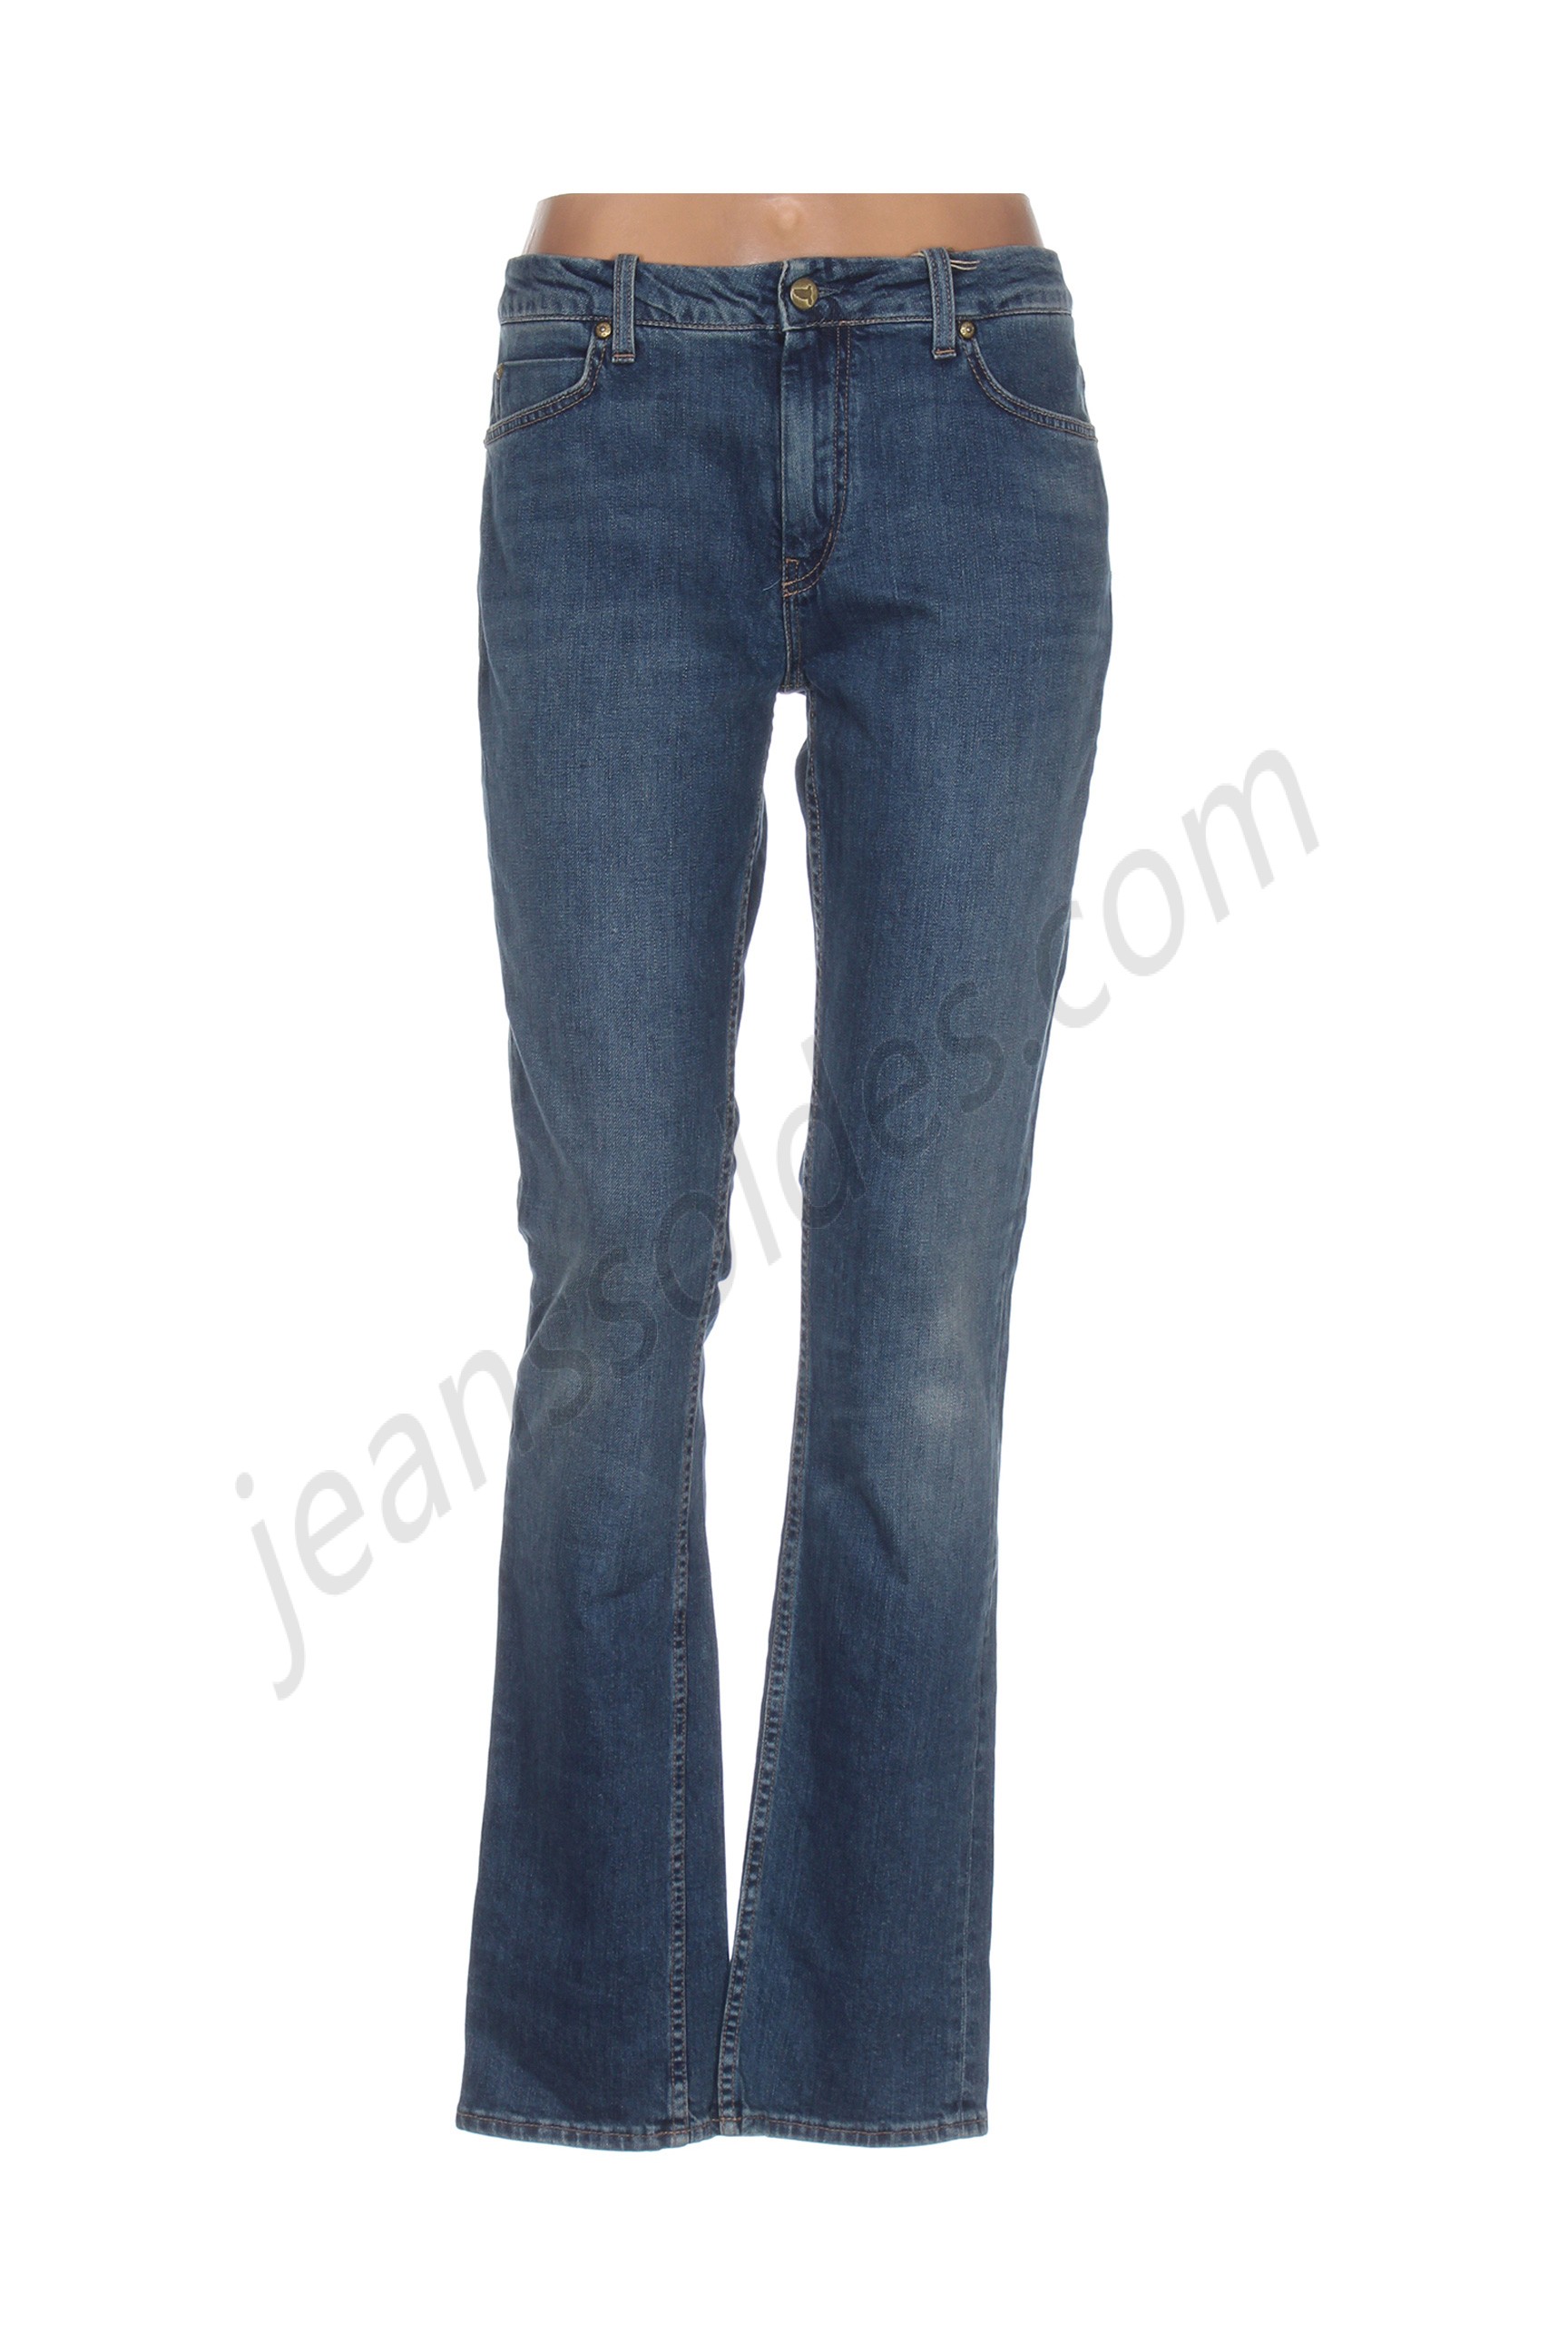 mih jeans-Jeans coupe droite prix d’amis - mih jeans-Jeans coupe droite prix d’amis